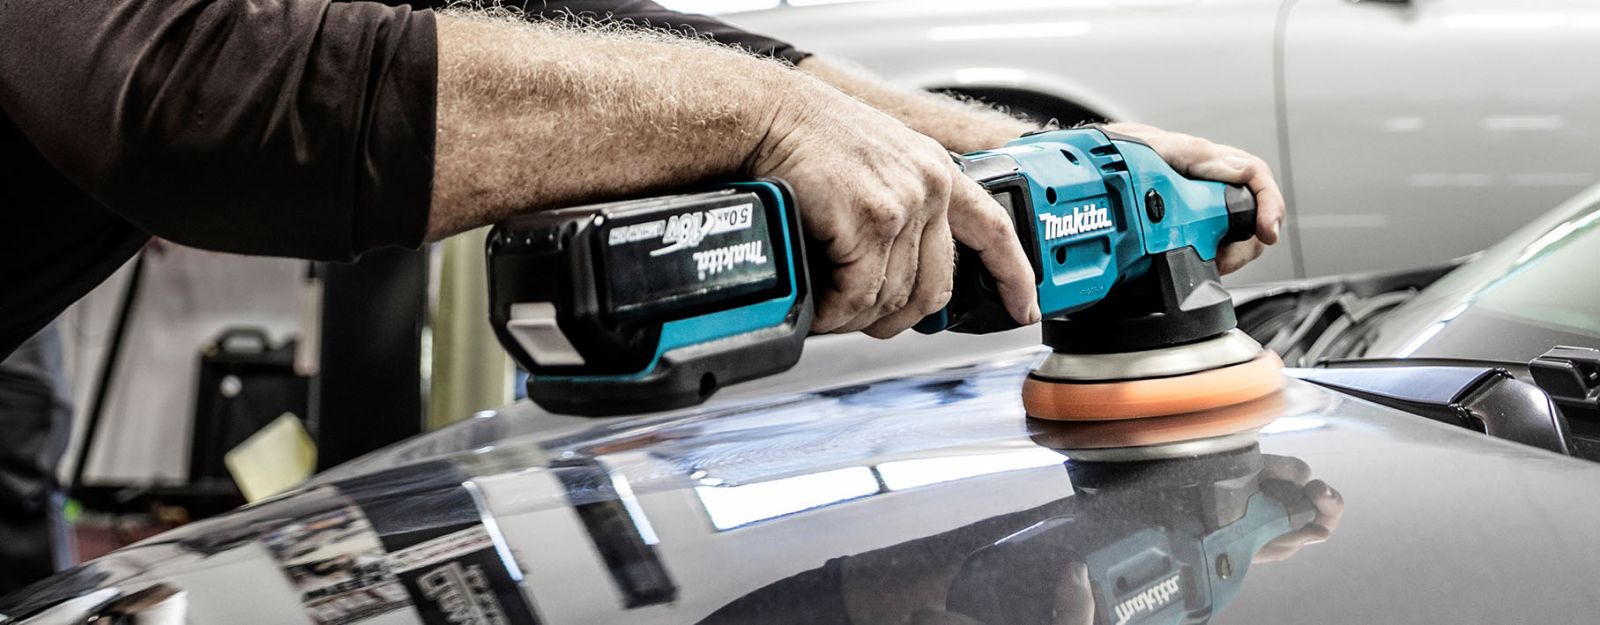 Makita power tools for car cleaning